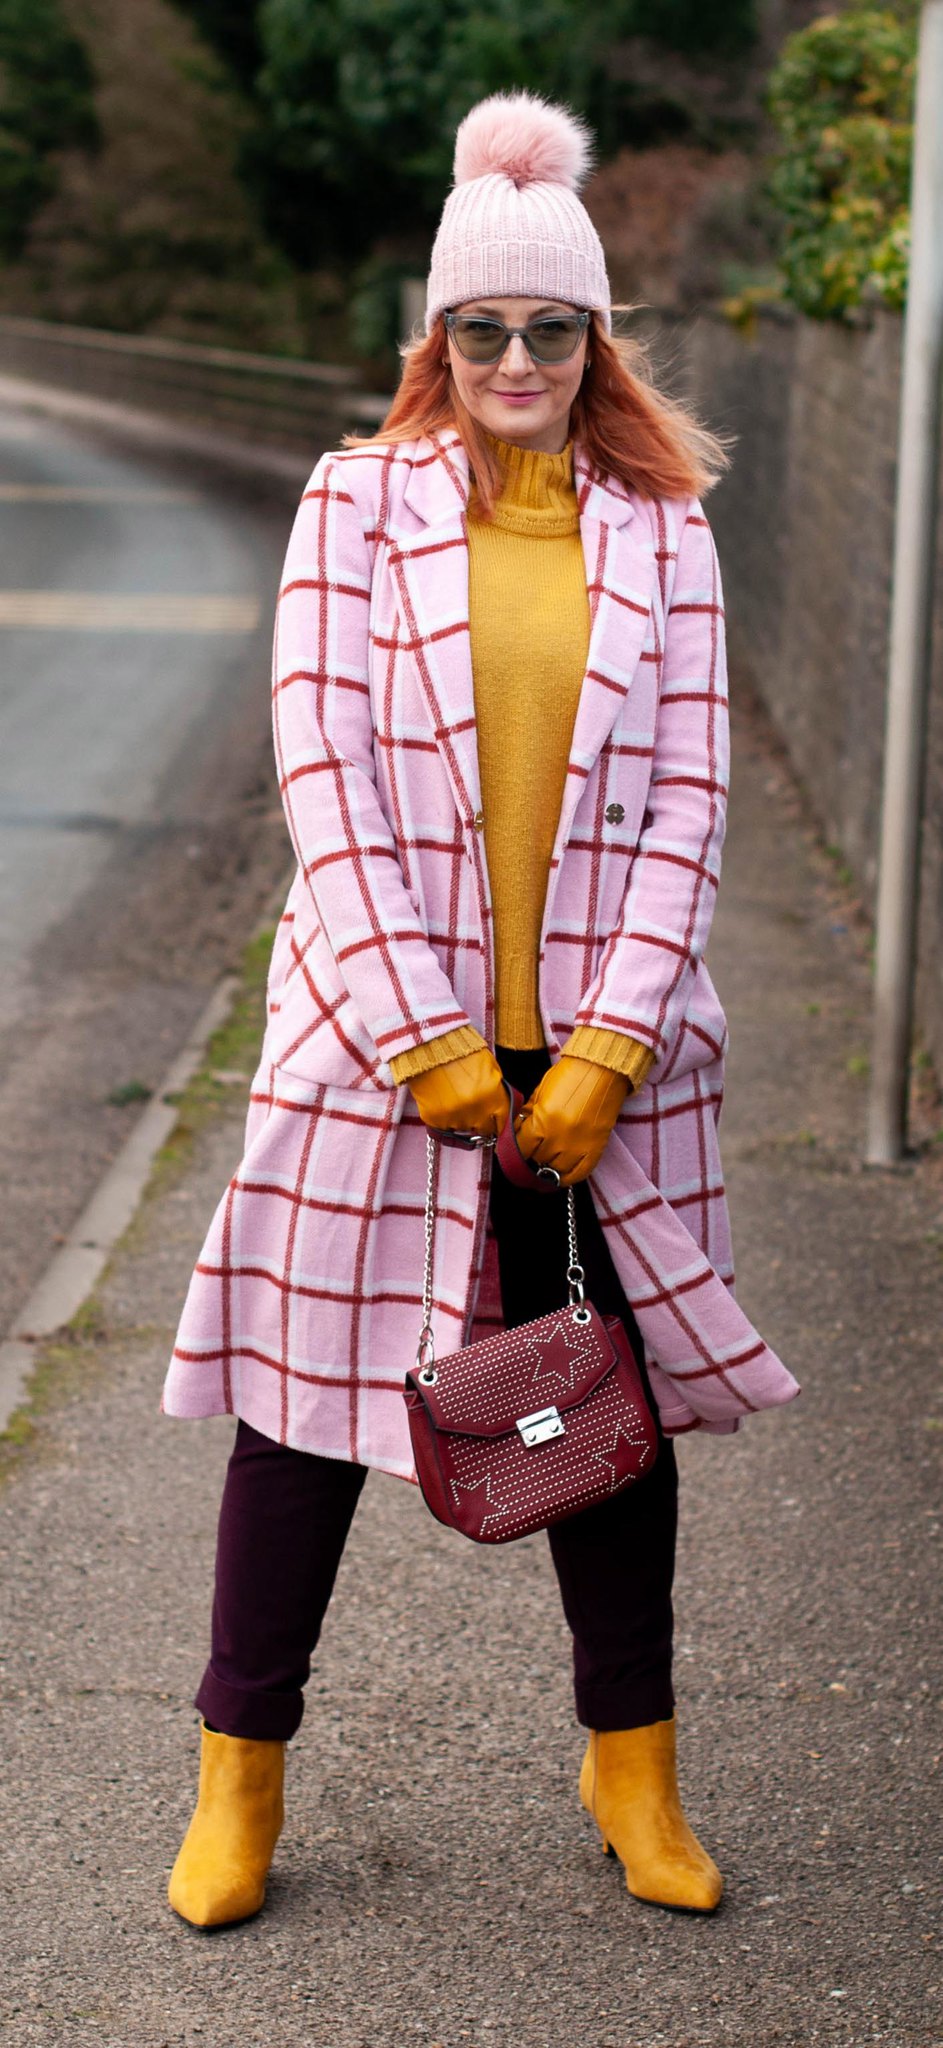 Winter Brights in Shades of Pink and Yellow | Not Dressed As Lamb, Fashion Over 40